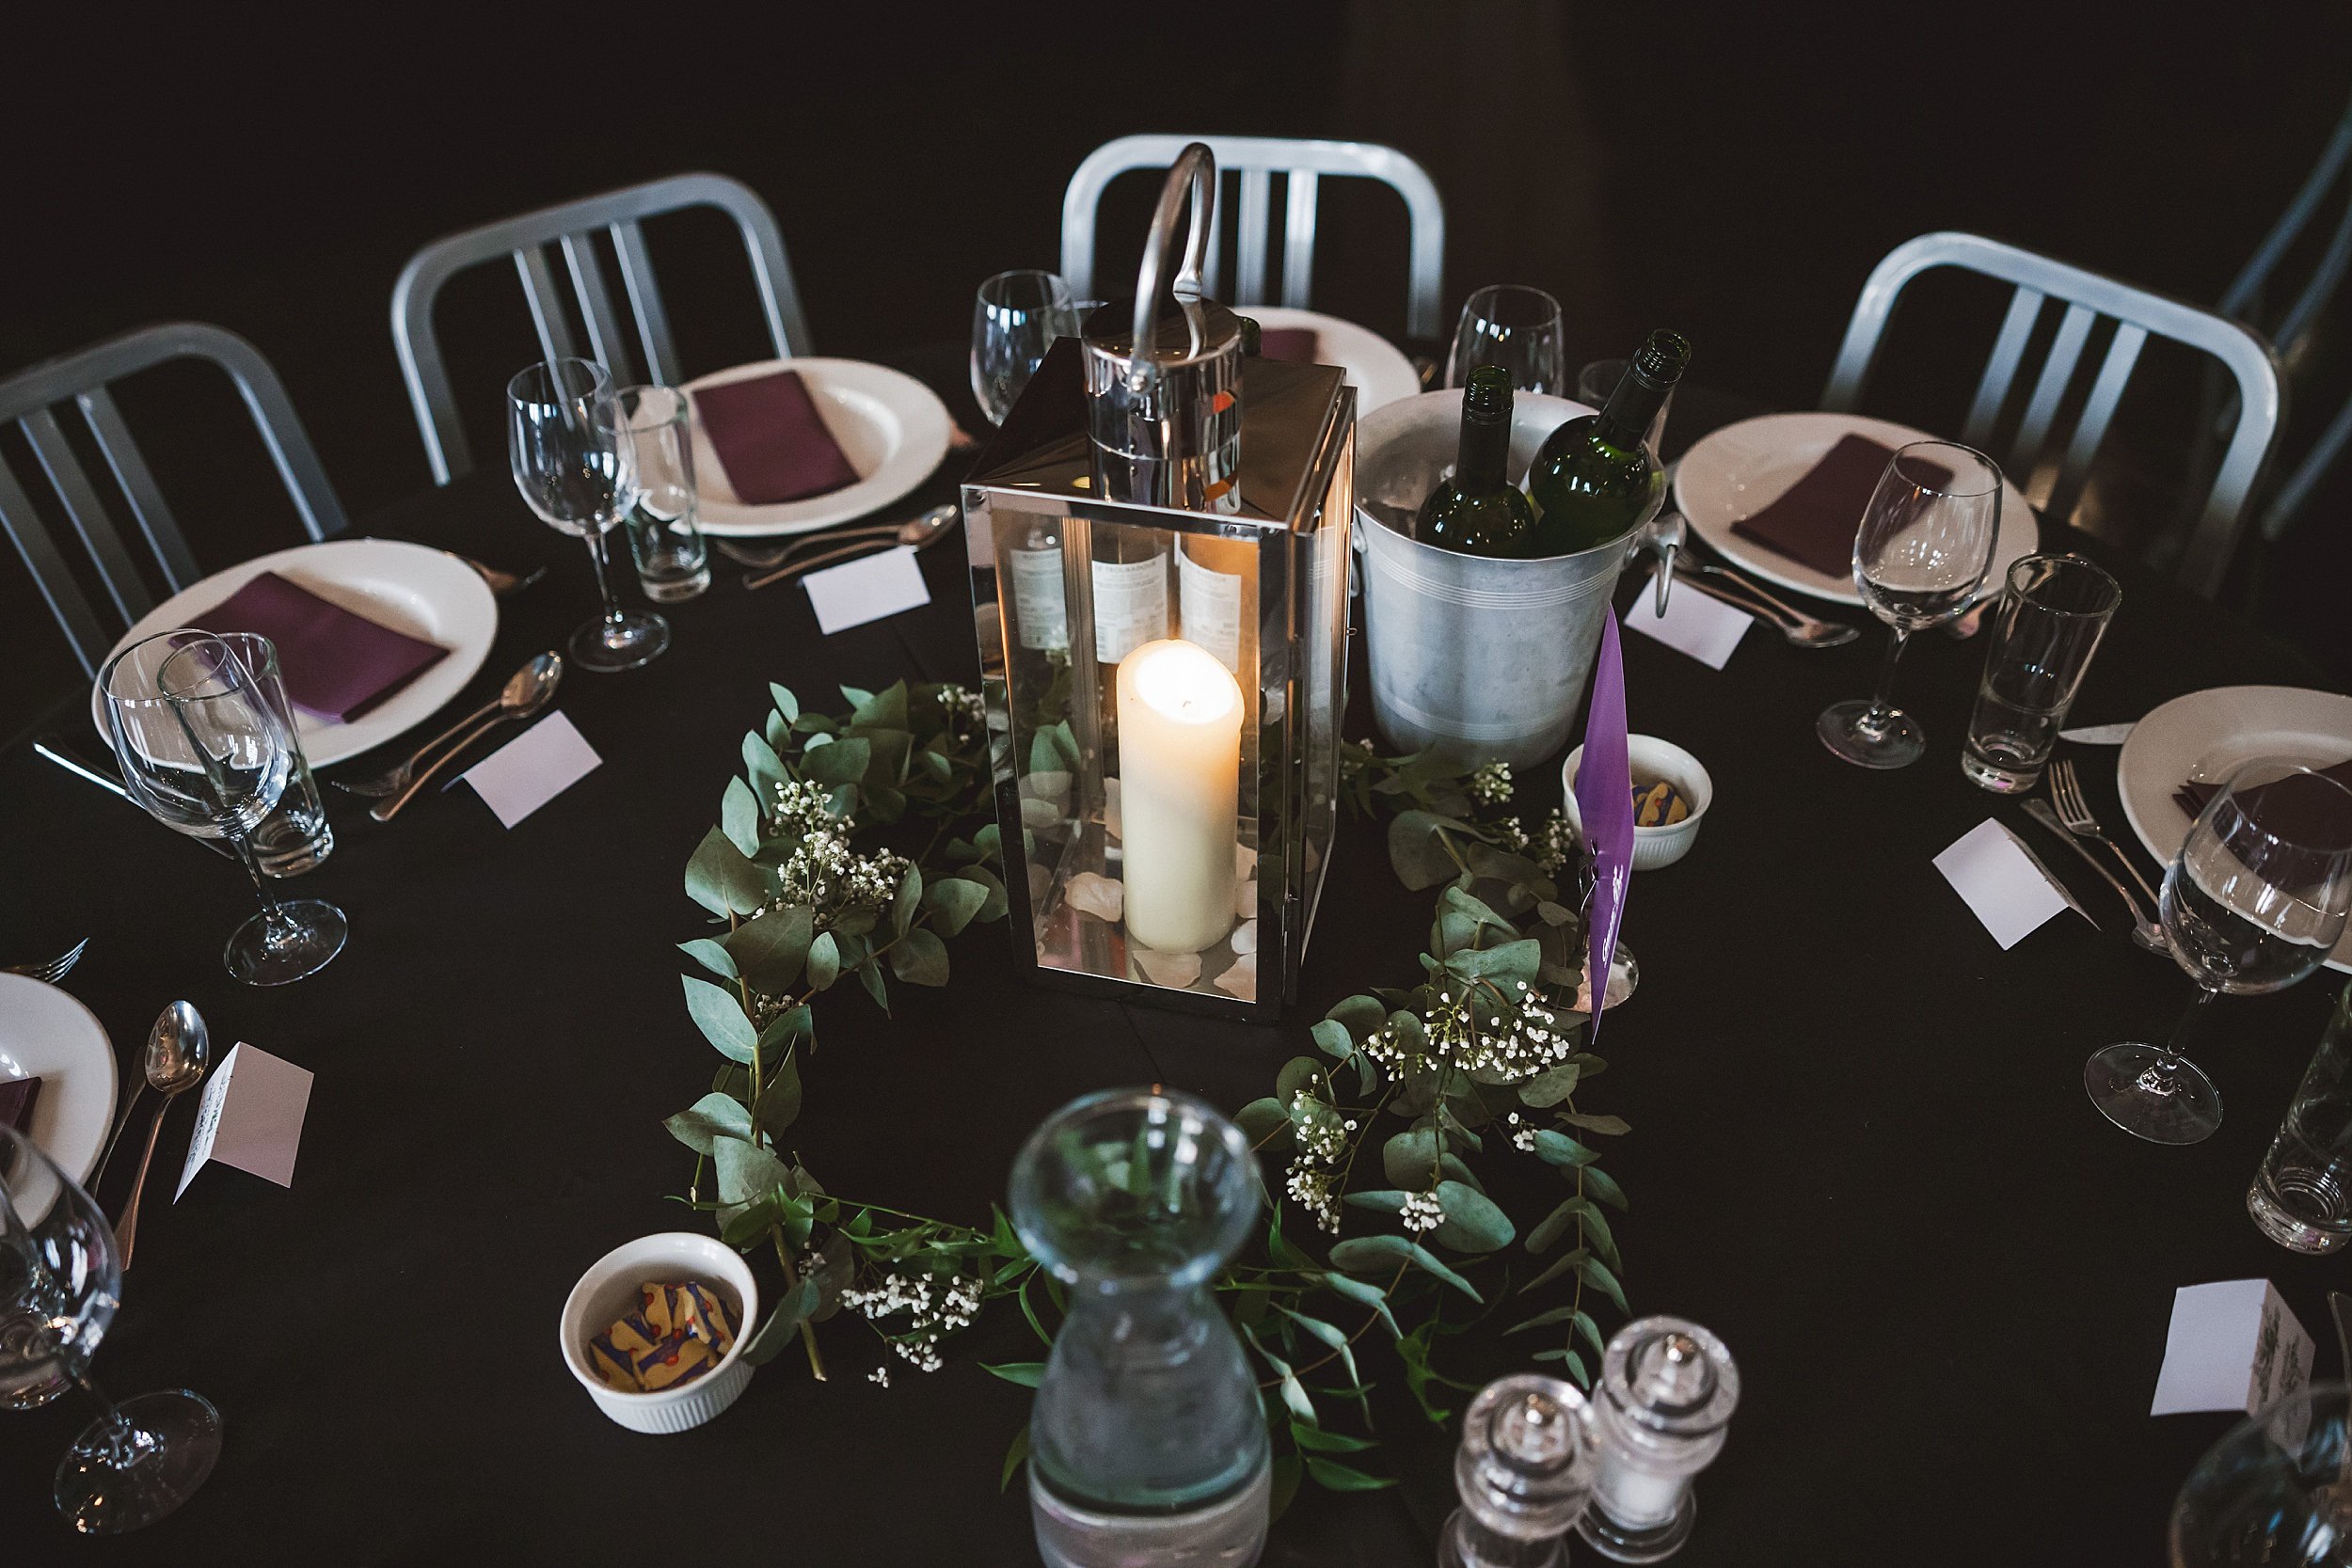 dining table set for dinner at the ghillie dhu edinburgh wedding venue with a candle and greenery centrepiece by documentary wedding photographer edinburgh scotland